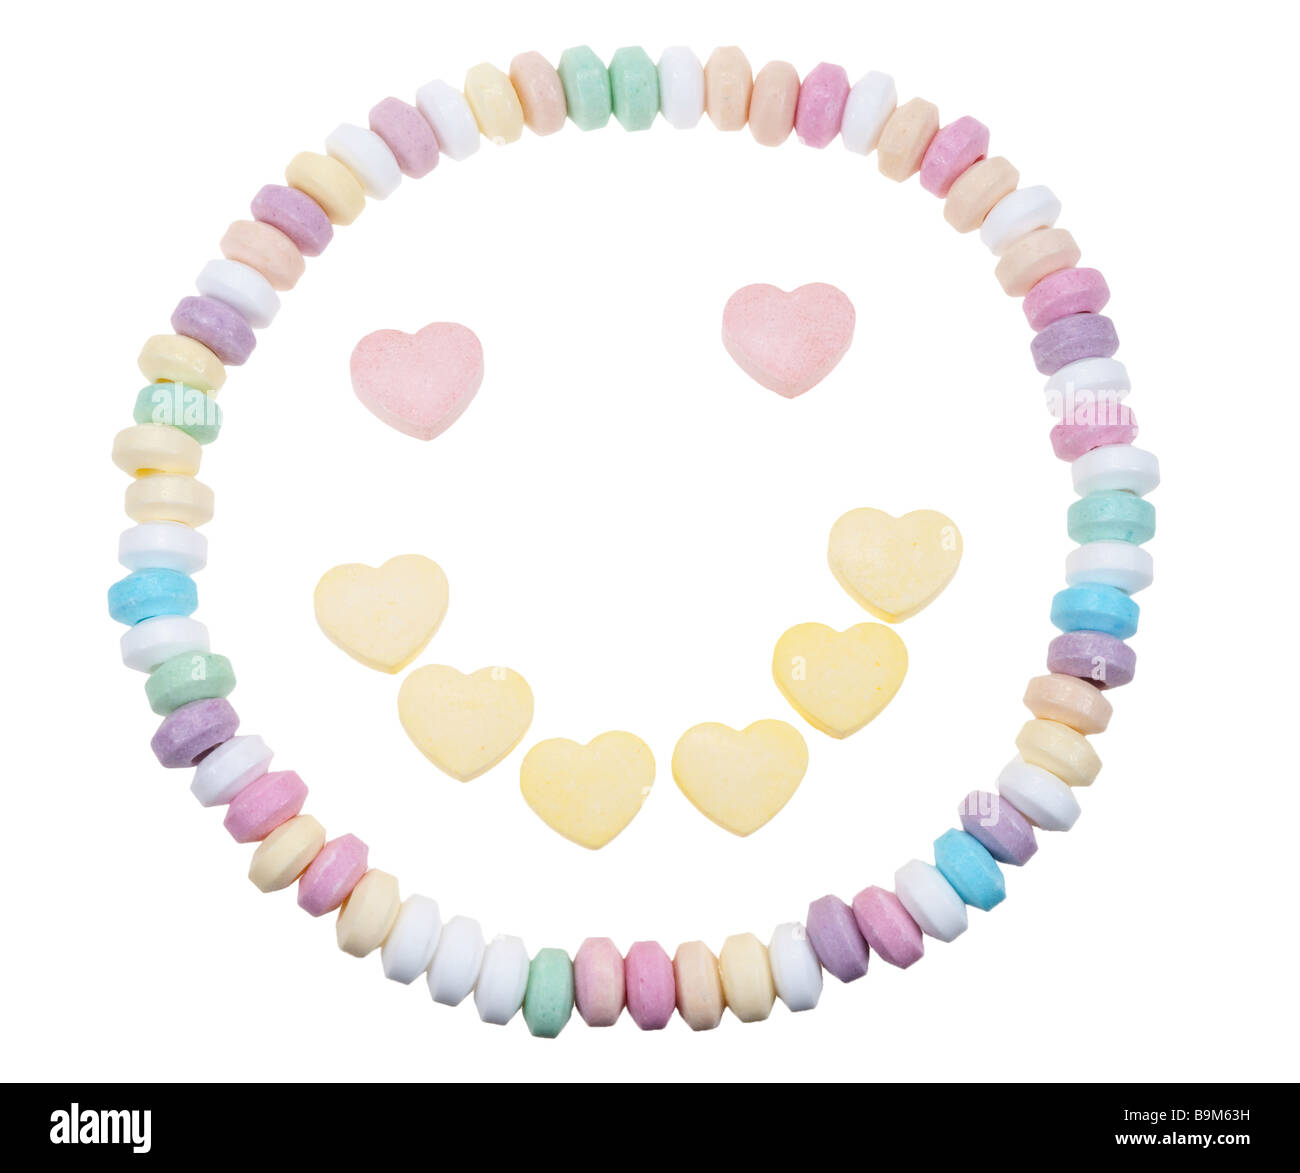 Candy Necklaces, Pack of 10, Individually Wrapped